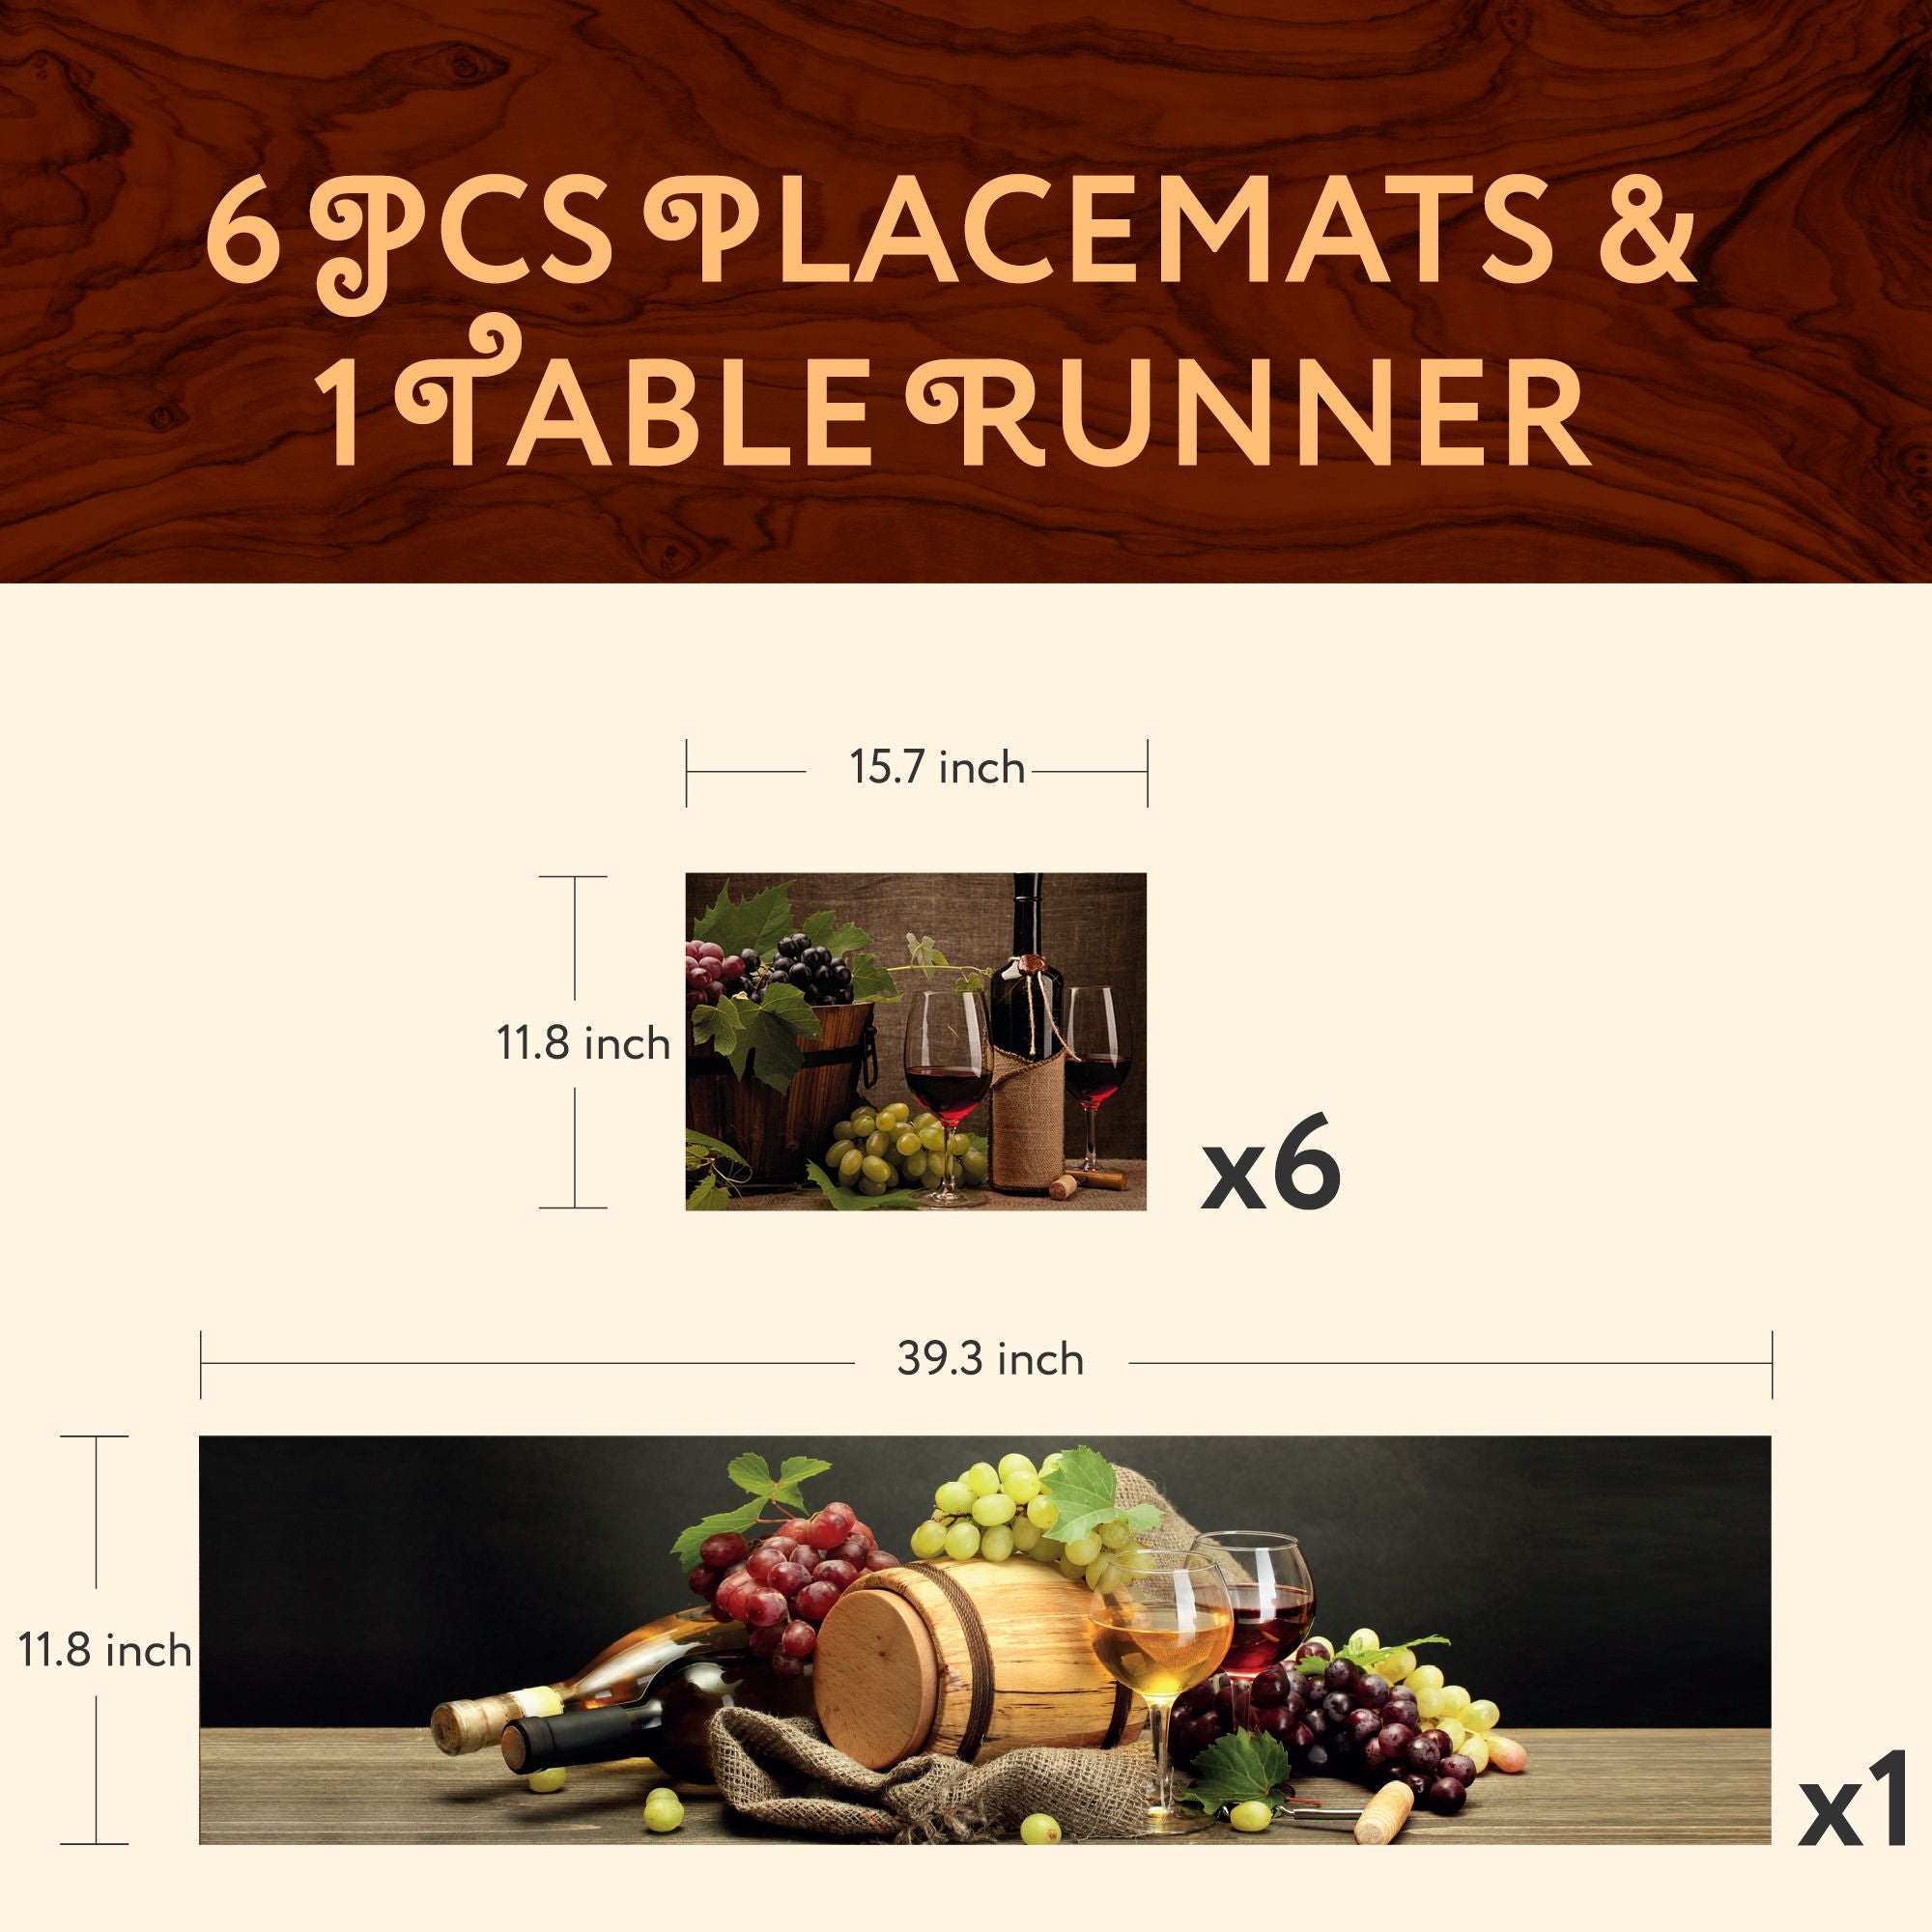 1 TABLE RUNNER + 6 PLACEMATS SET (WINE)